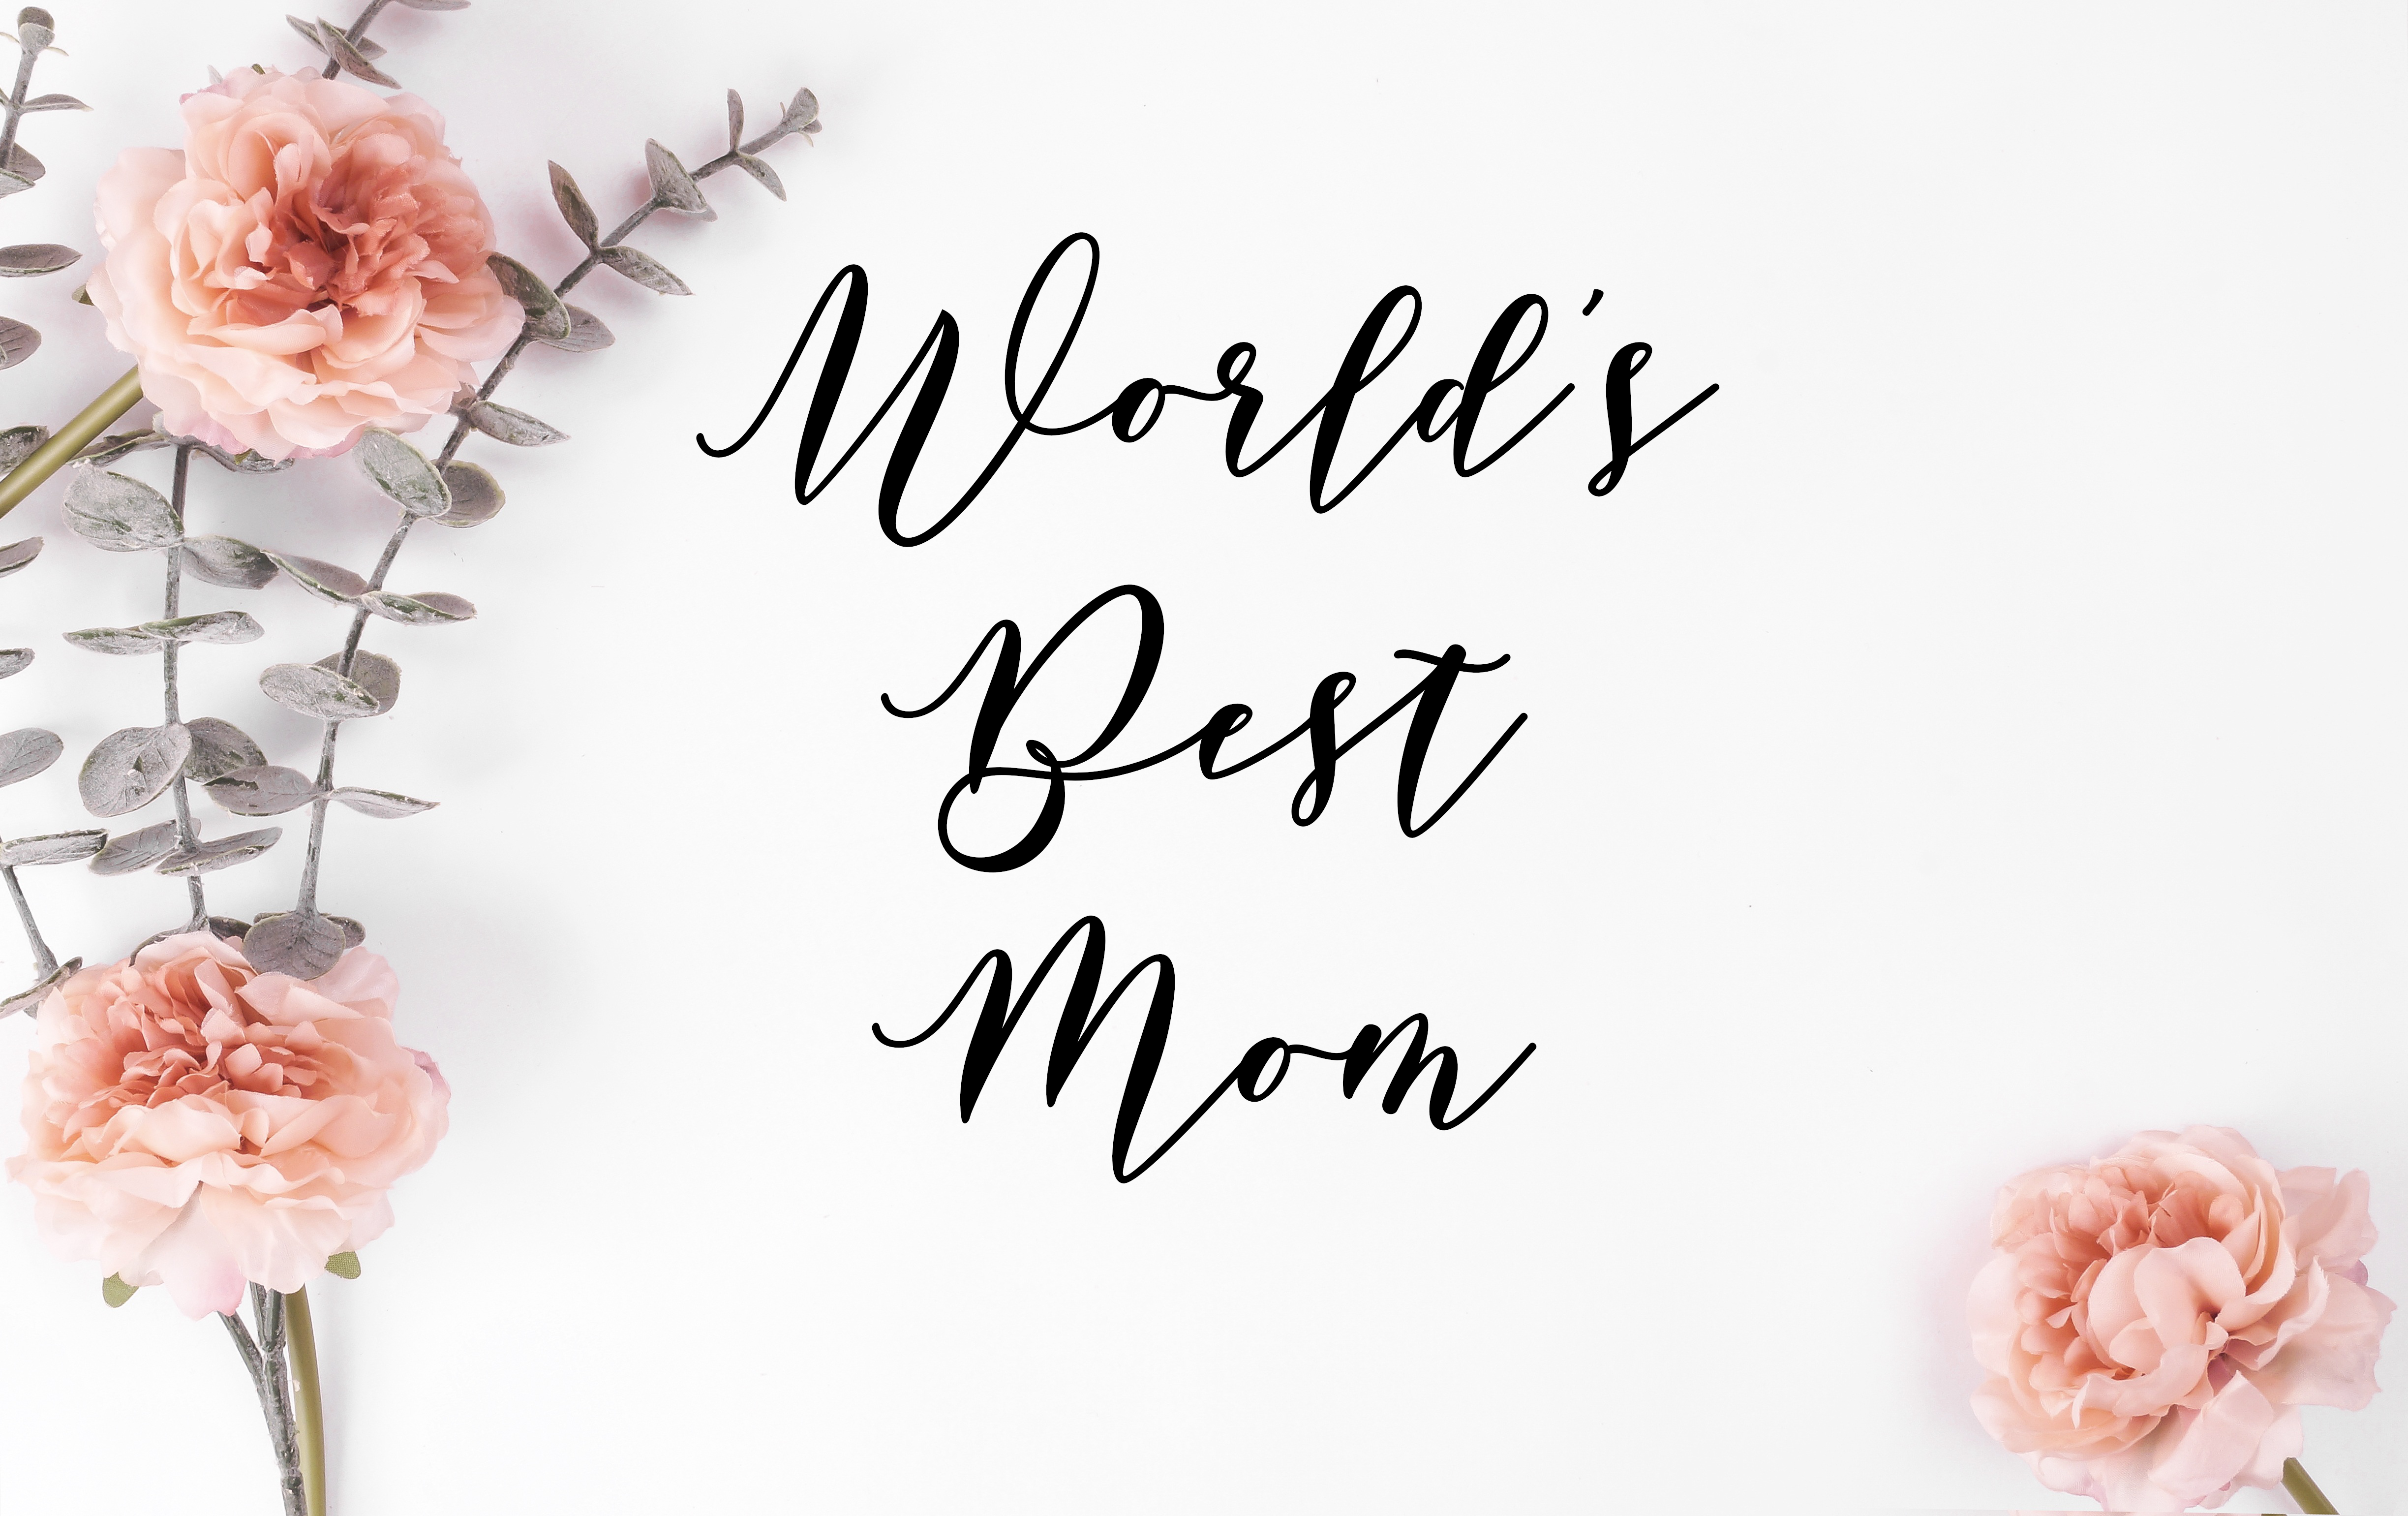 World's Best Mom Decal - Holiday Mother/Mom Vinyl Decals for Home, Gifts, Businesses and More!